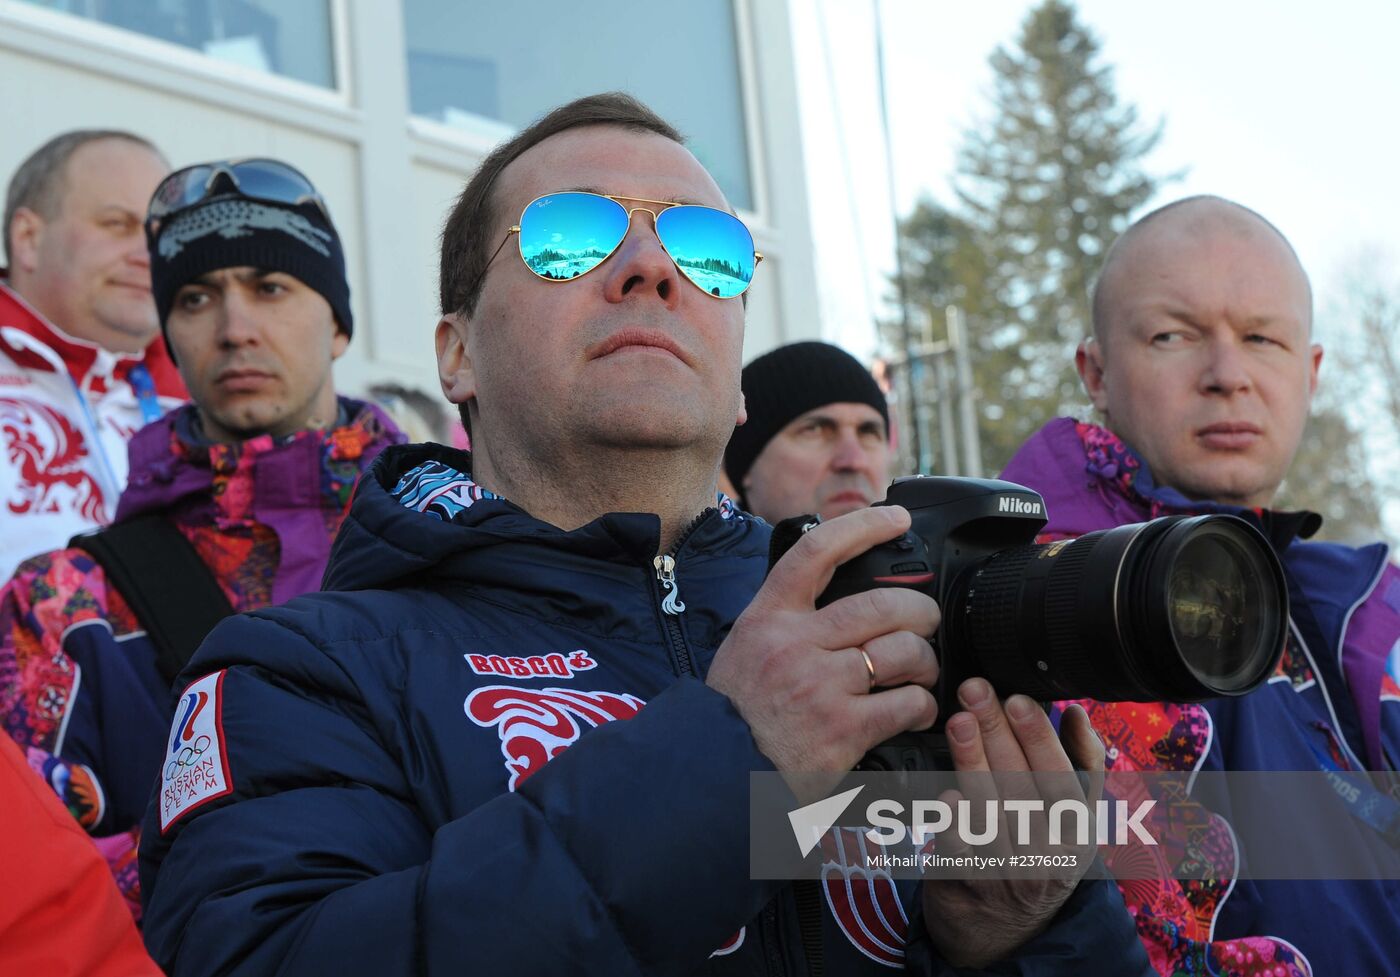 V.Putin and D.Medvedev attend Olympic cross-country skiing competition in Sochi